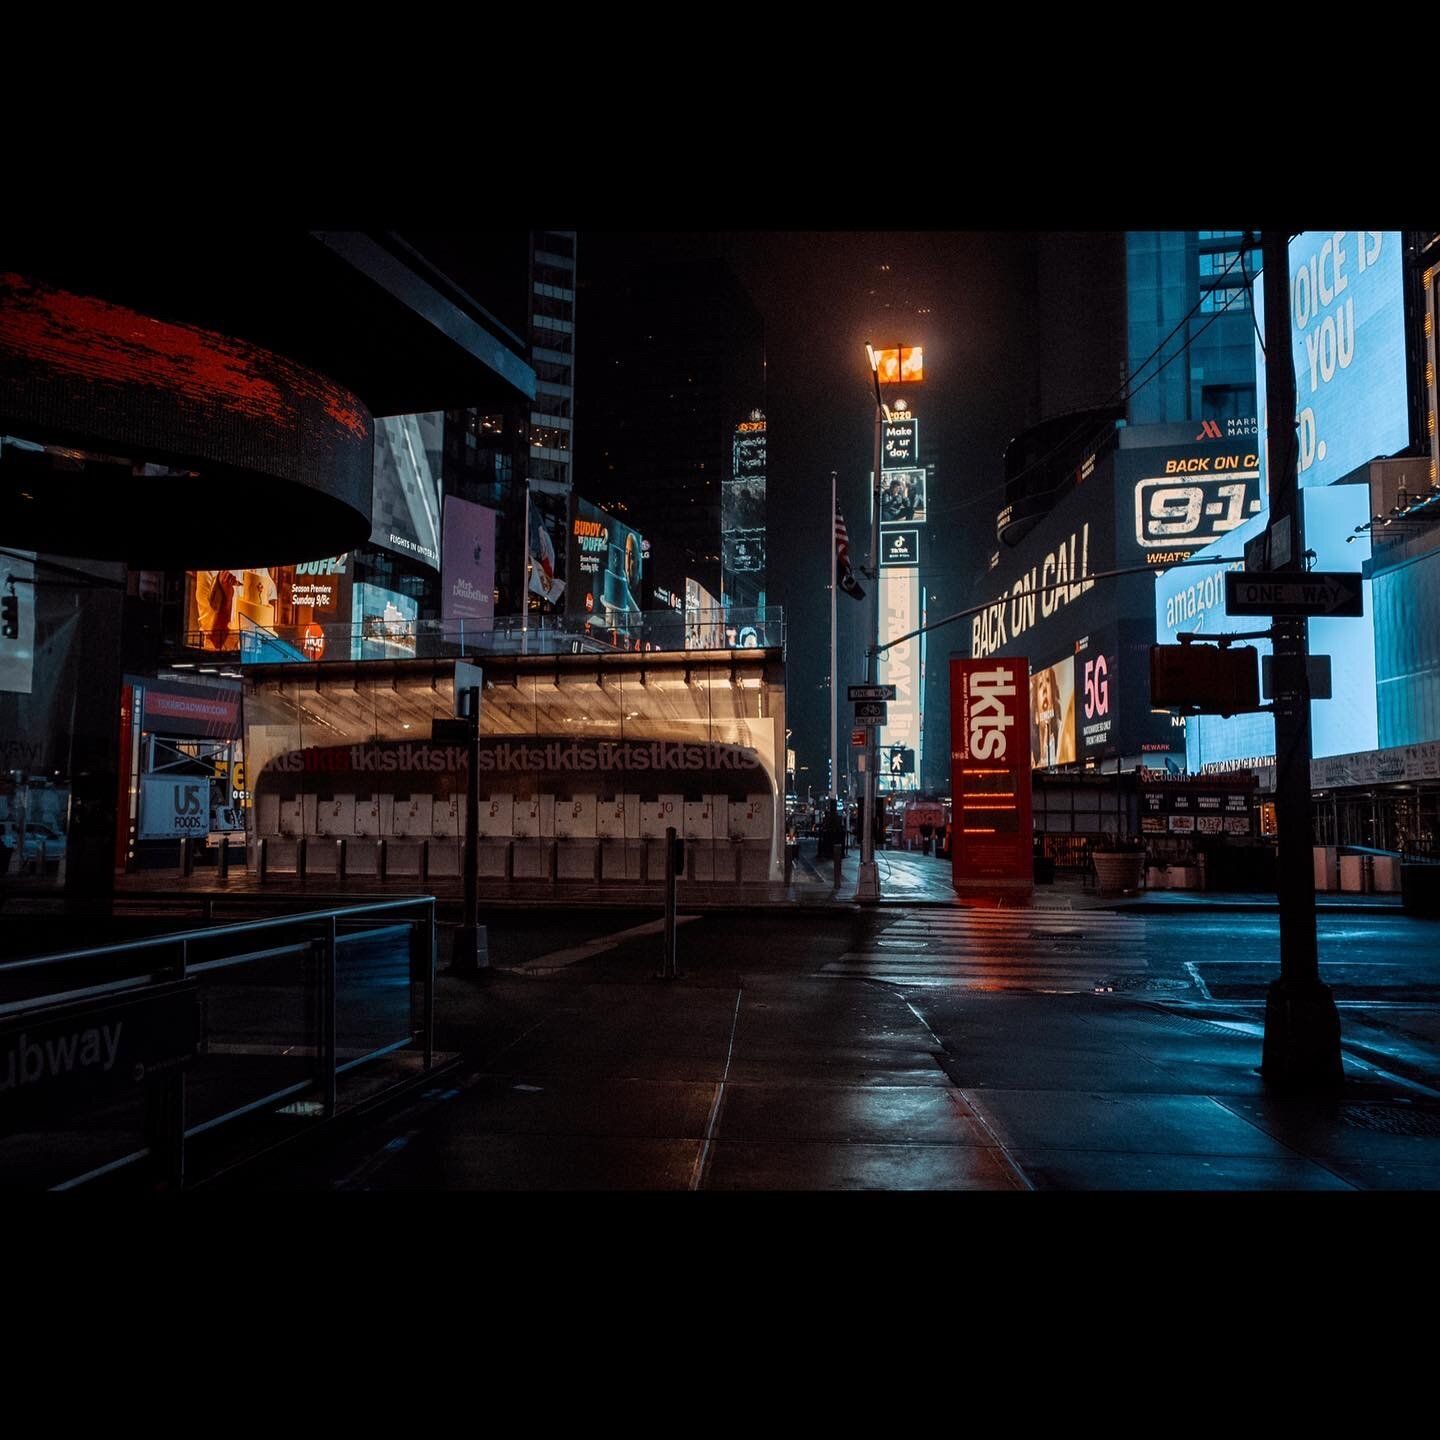 Photograph of empty Times Square at night